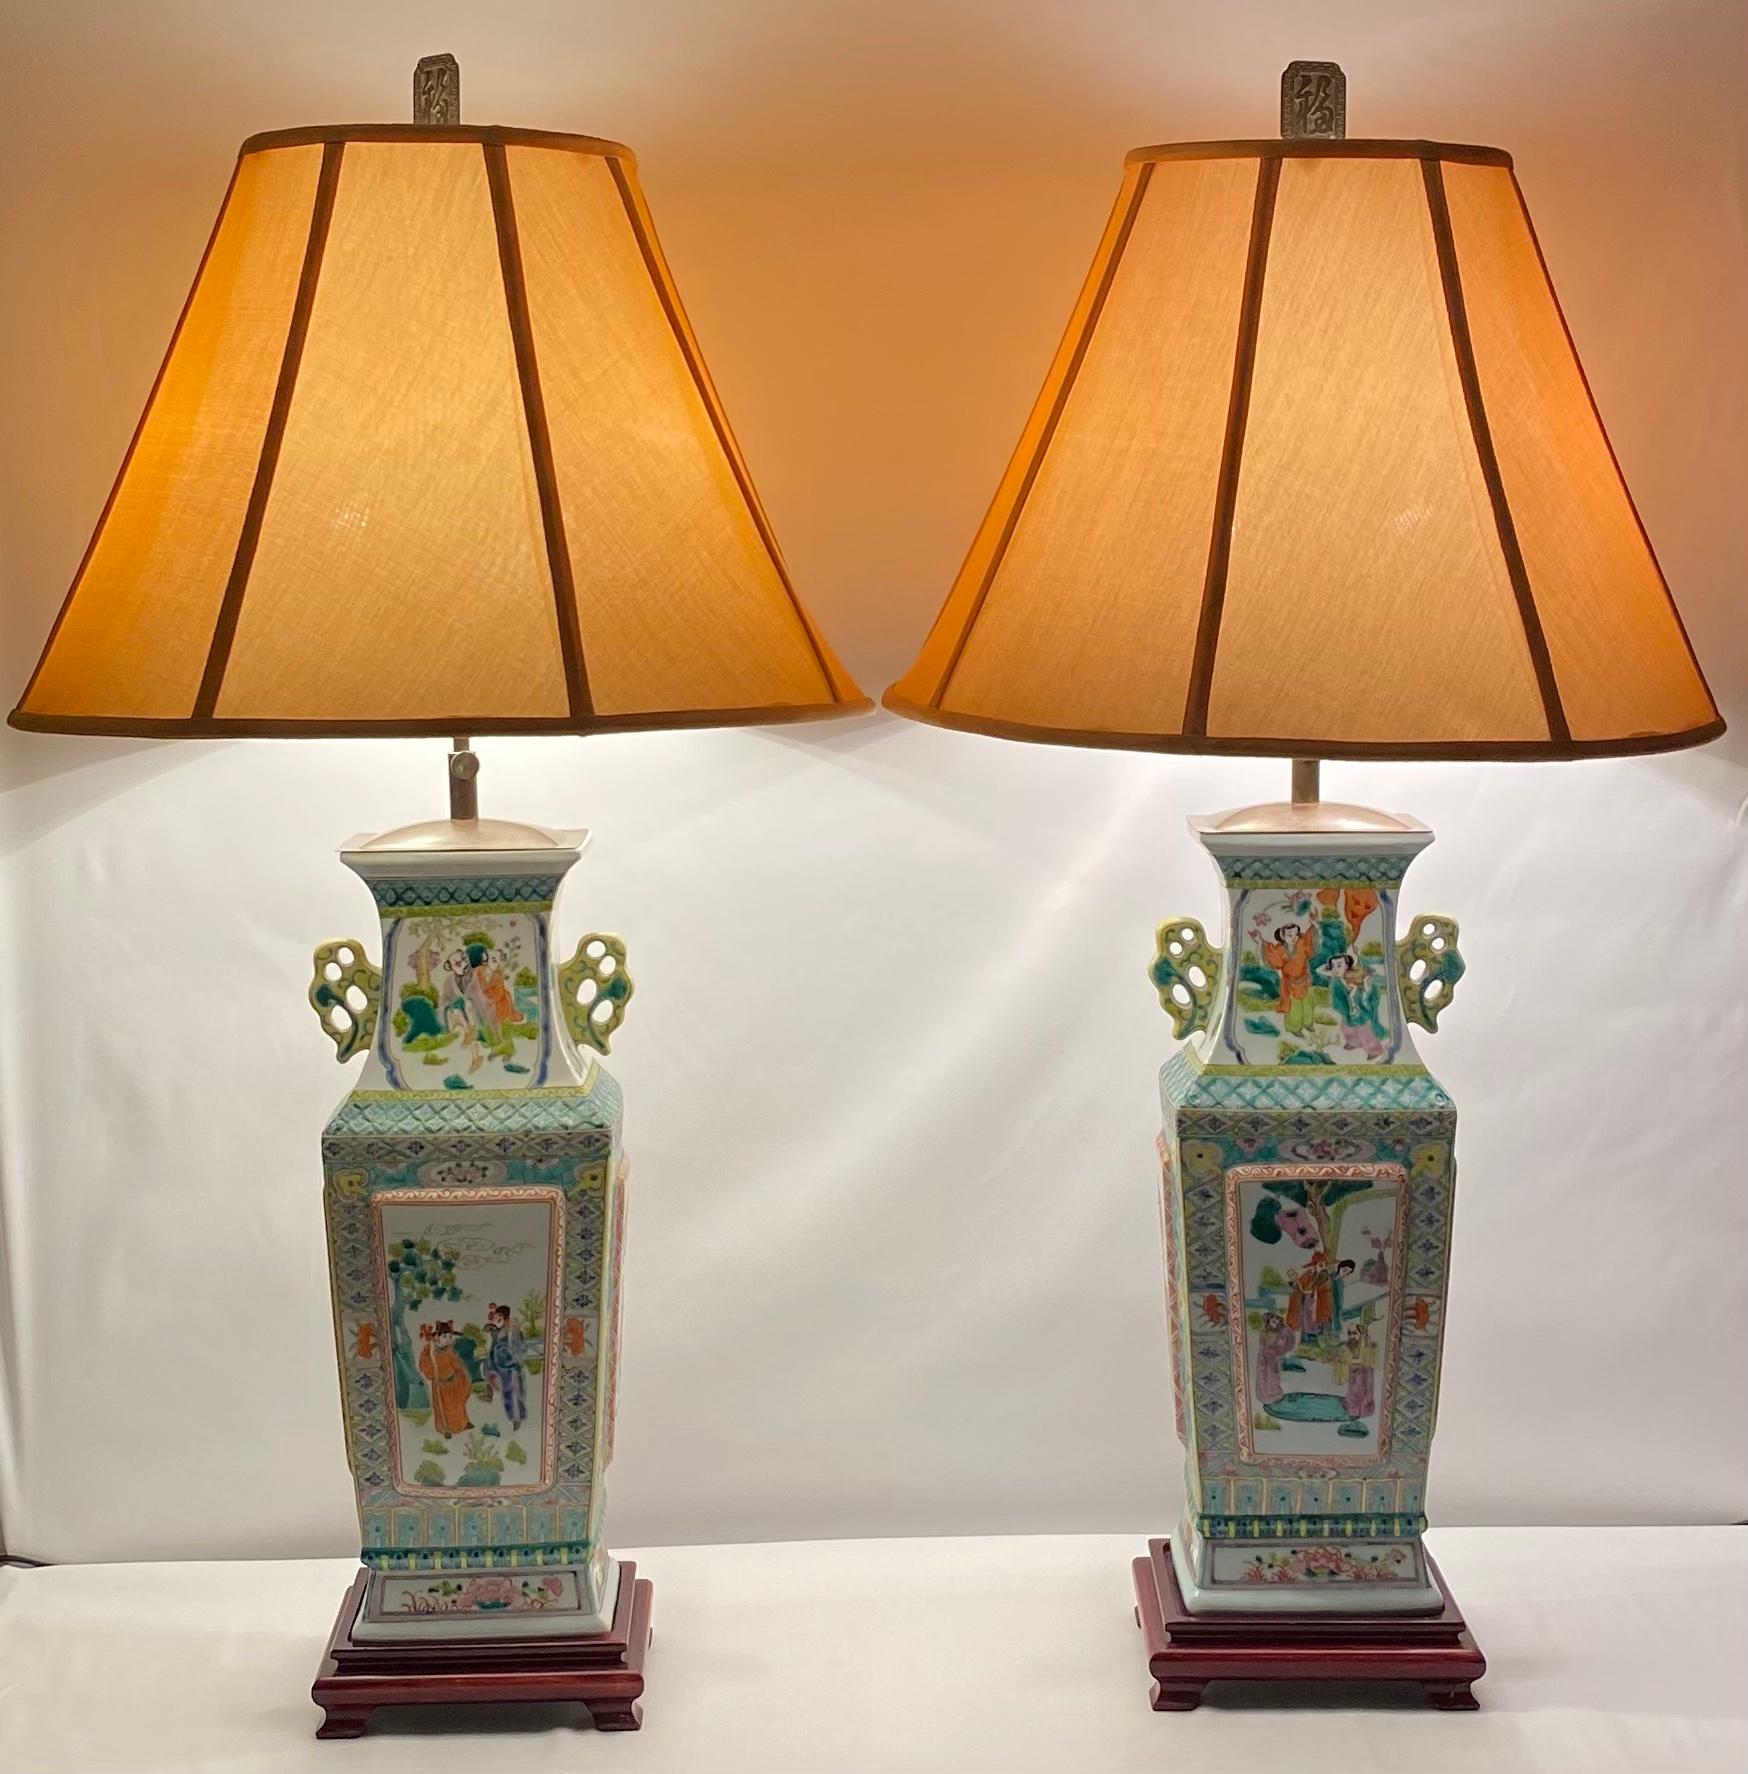 Pair of lamps in Canton porcelain decorated with traditional figurative art, flowers and pagodas in pink and green tones on a white background within decorated borders, circa 1940. Famille Rose style. 

Recently rewired and fully functional.